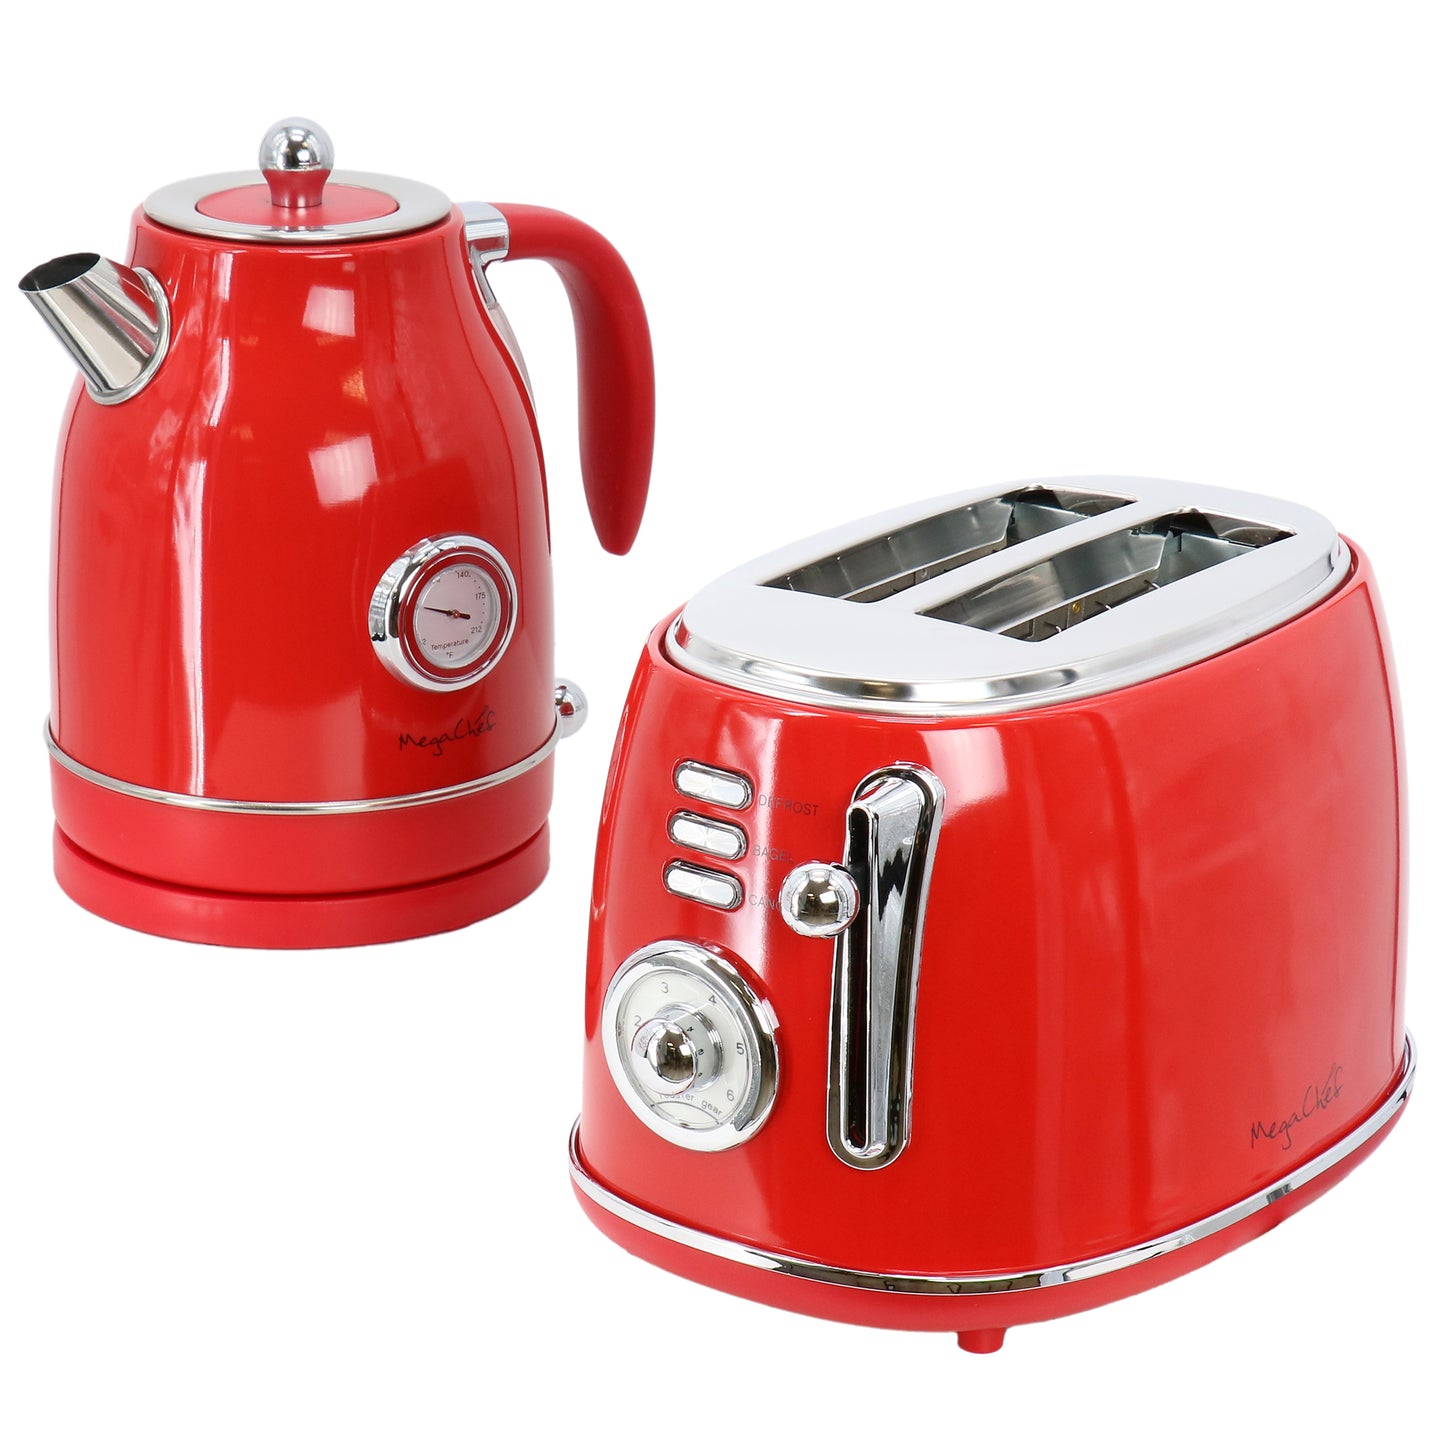 MegaChef MegaChef 1.7 Liter Electric Tea Kettle and 2 Slice Toaster Combo in Red